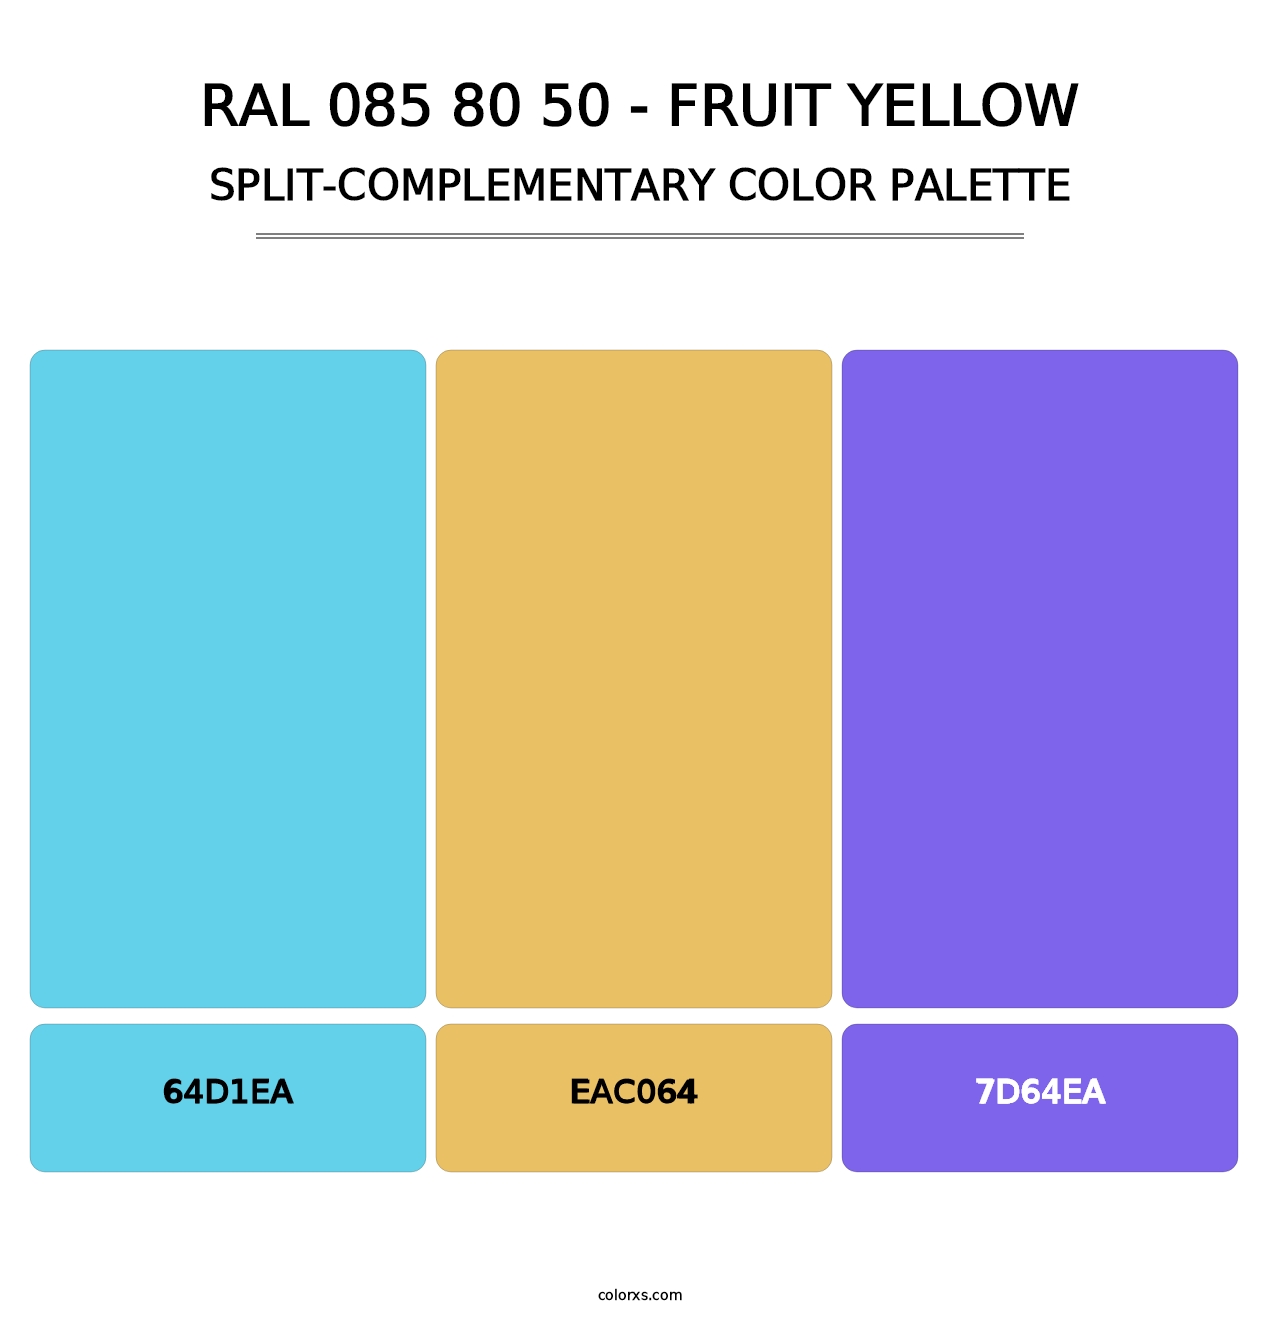 RAL 085 80 50 - Fruit Yellow - Split-Complementary Color Palette